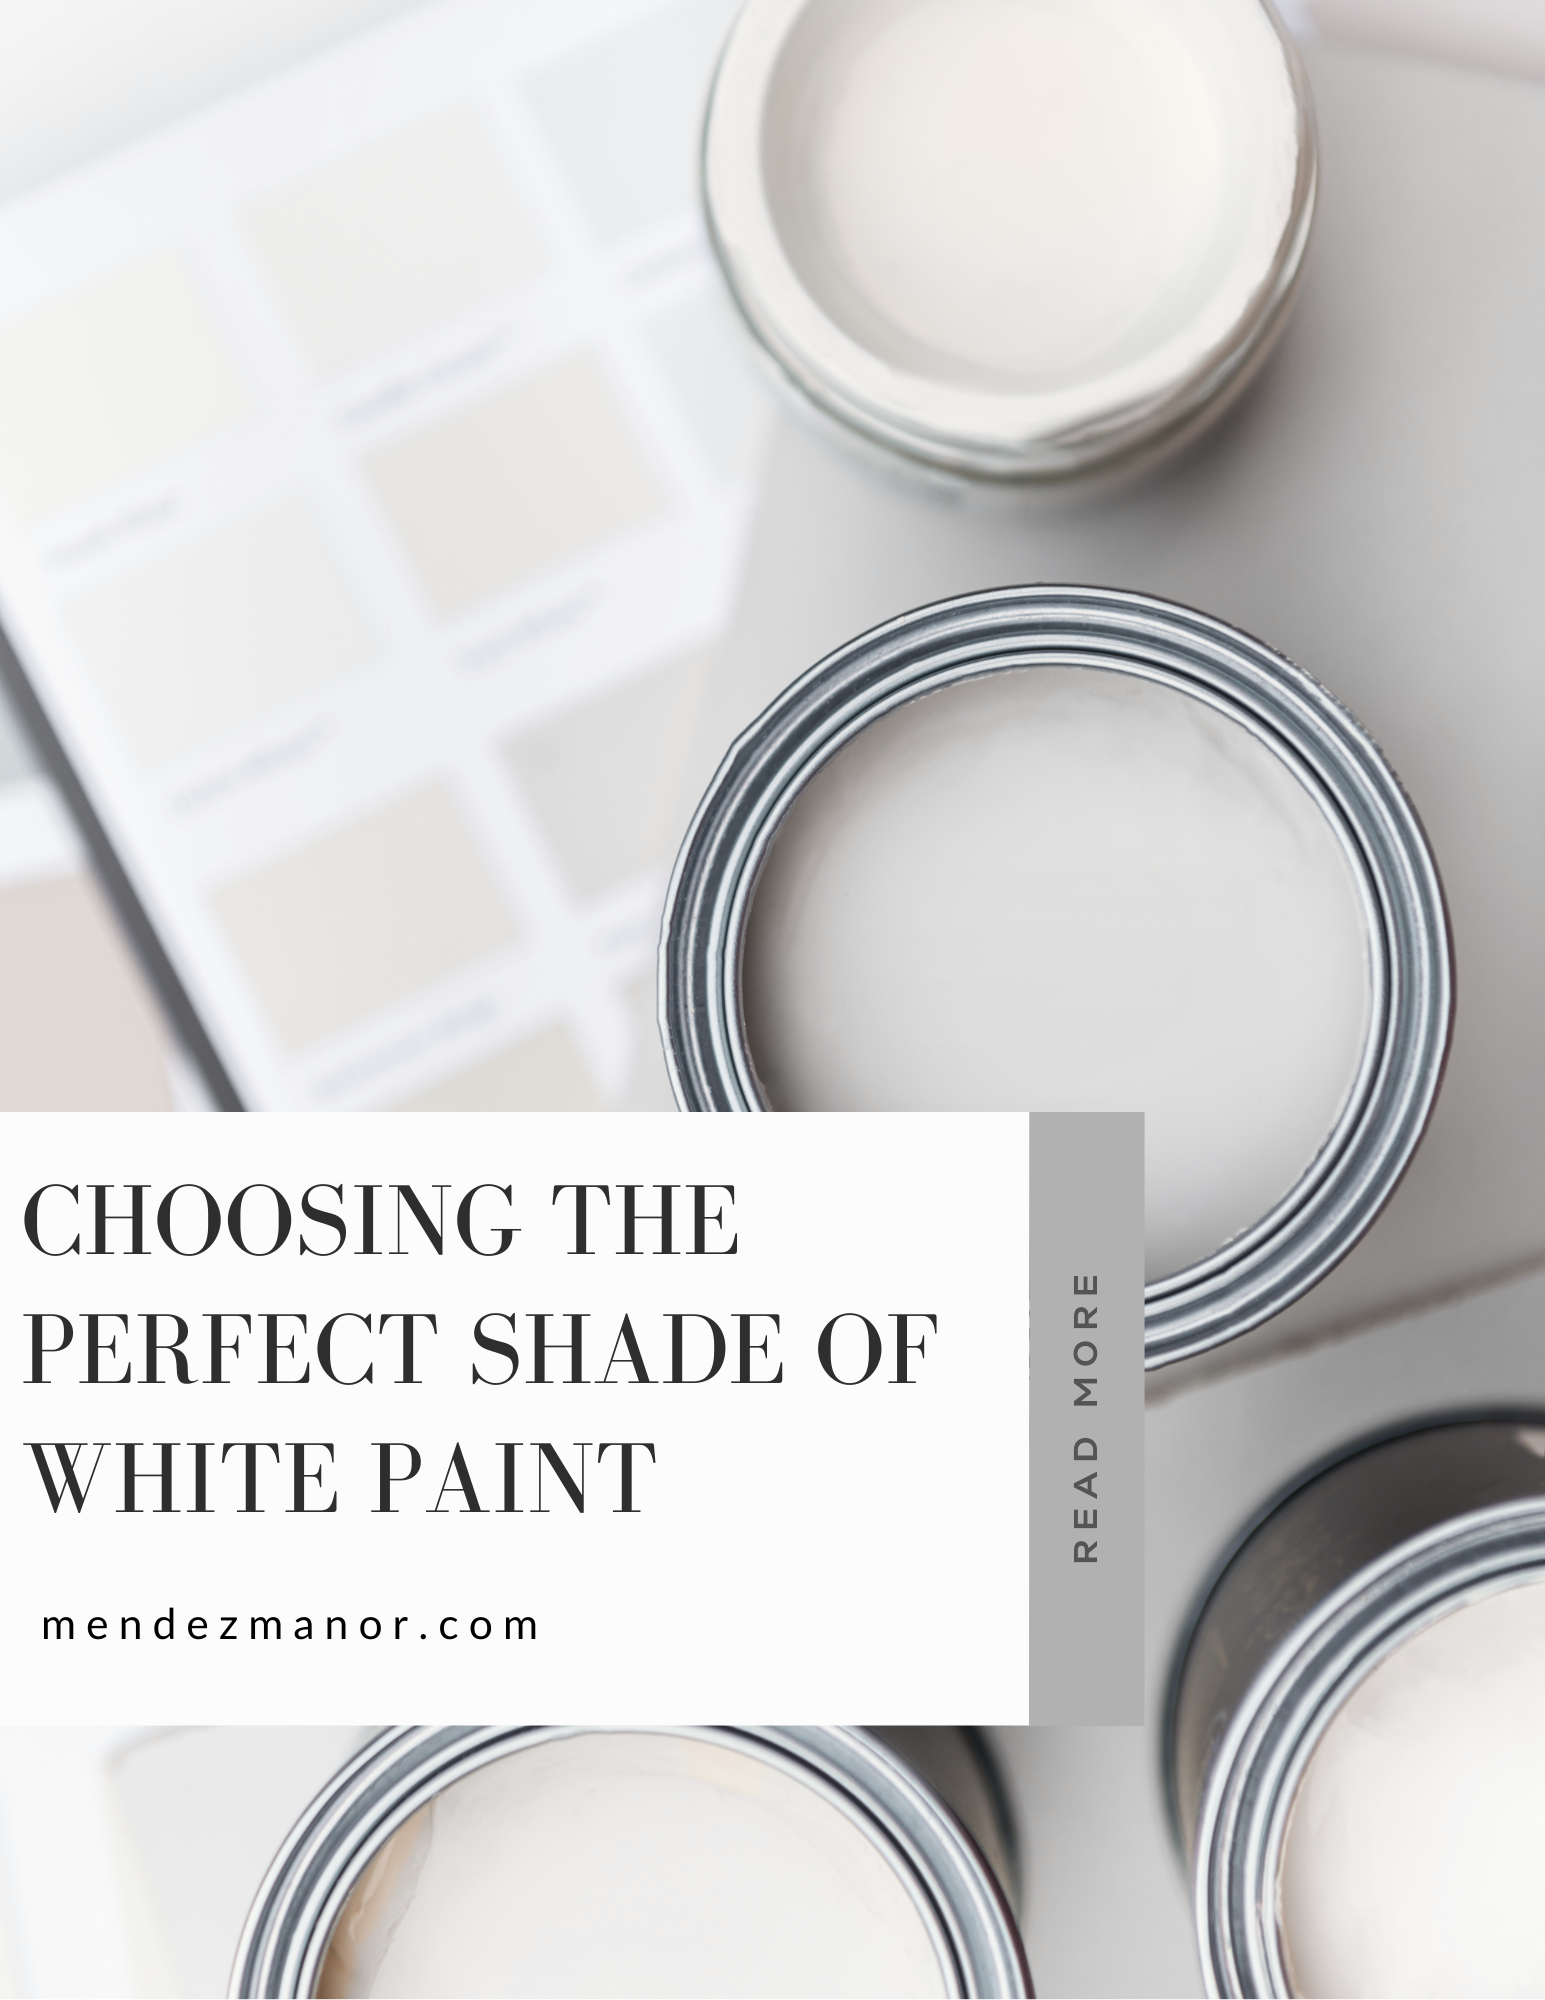 Choosing the Perfect Shade of White Paint